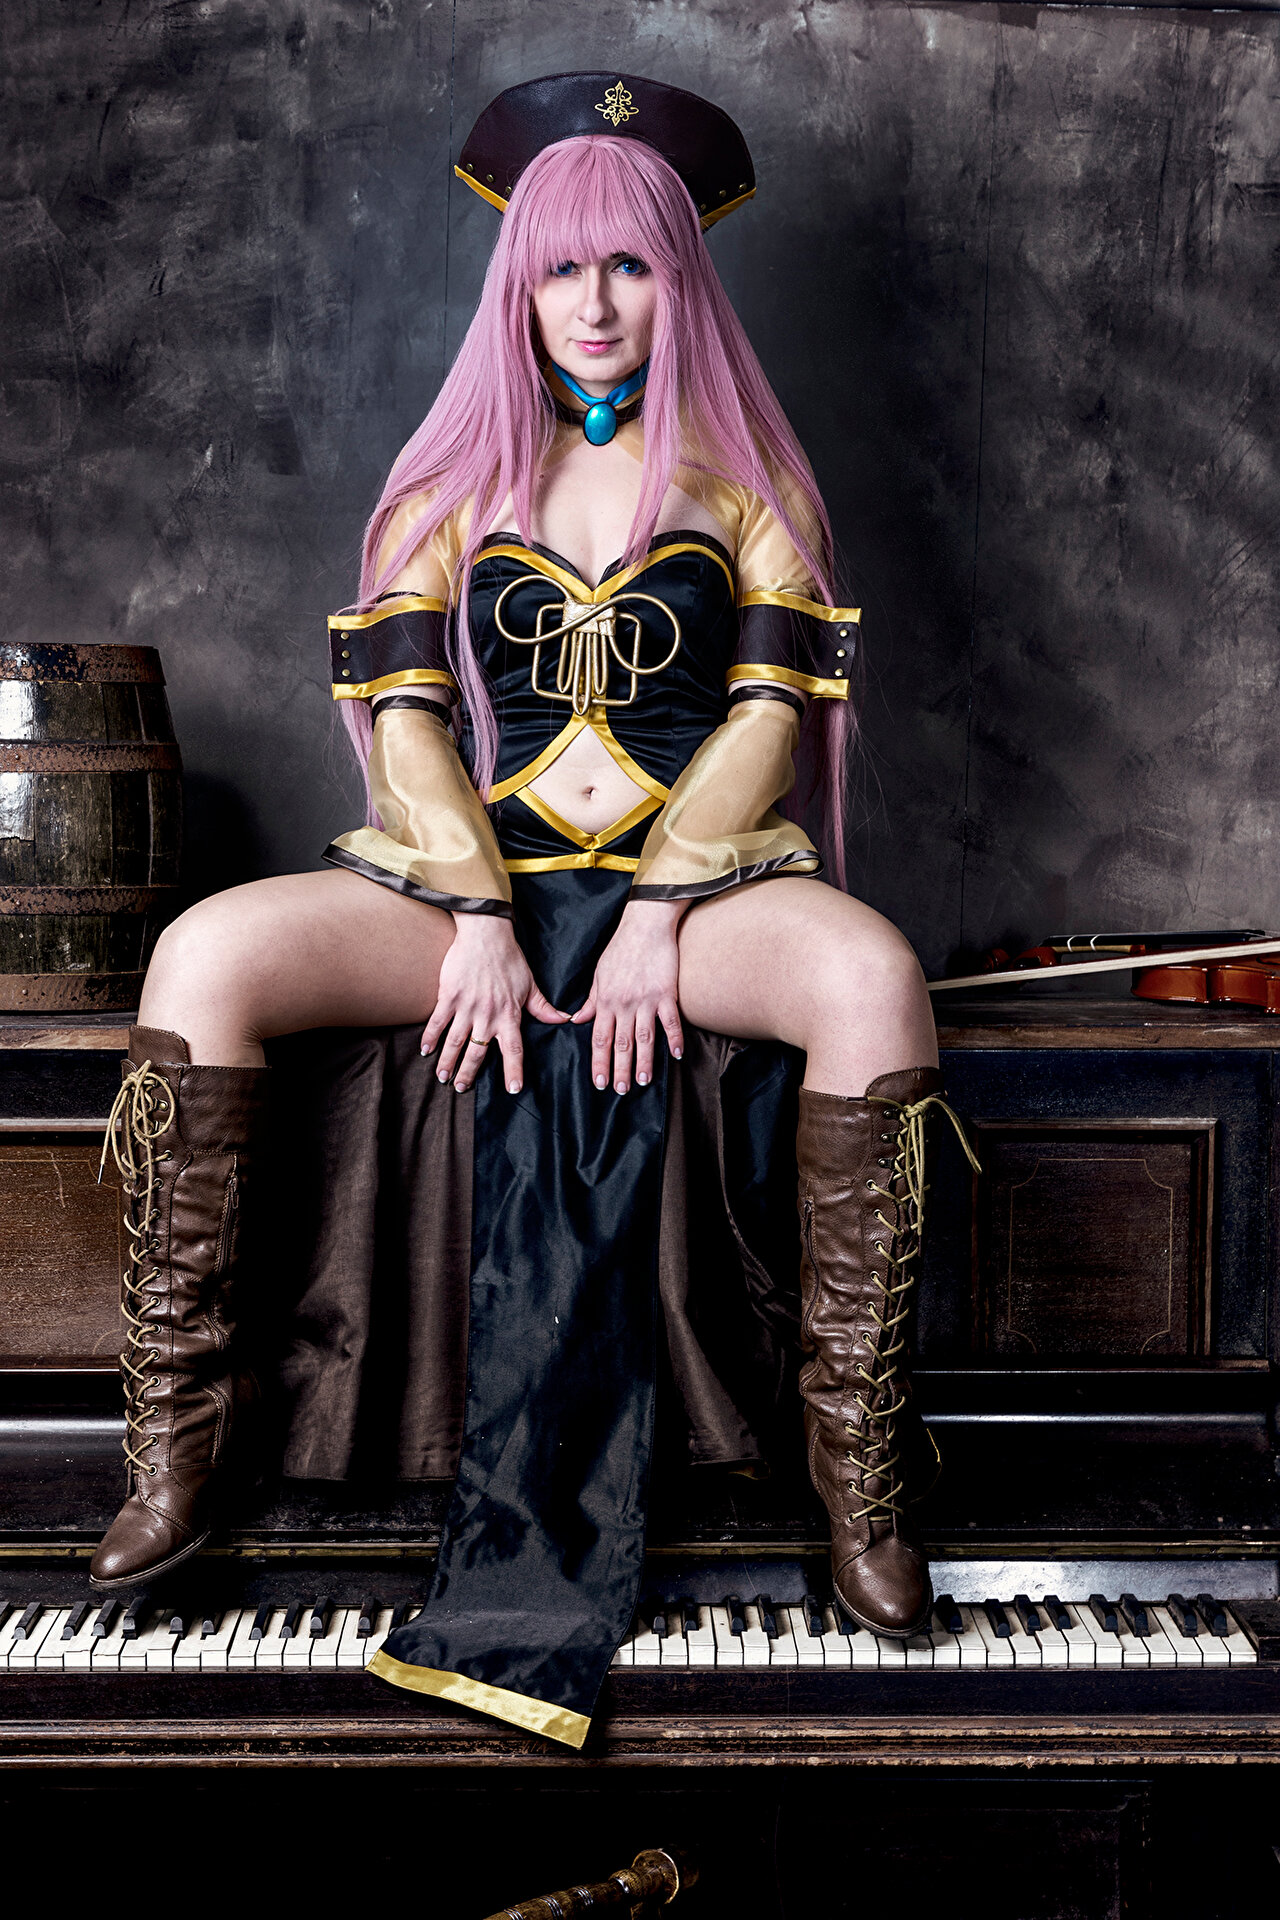 Cospix.net photo featuring Alice in Cosplayland